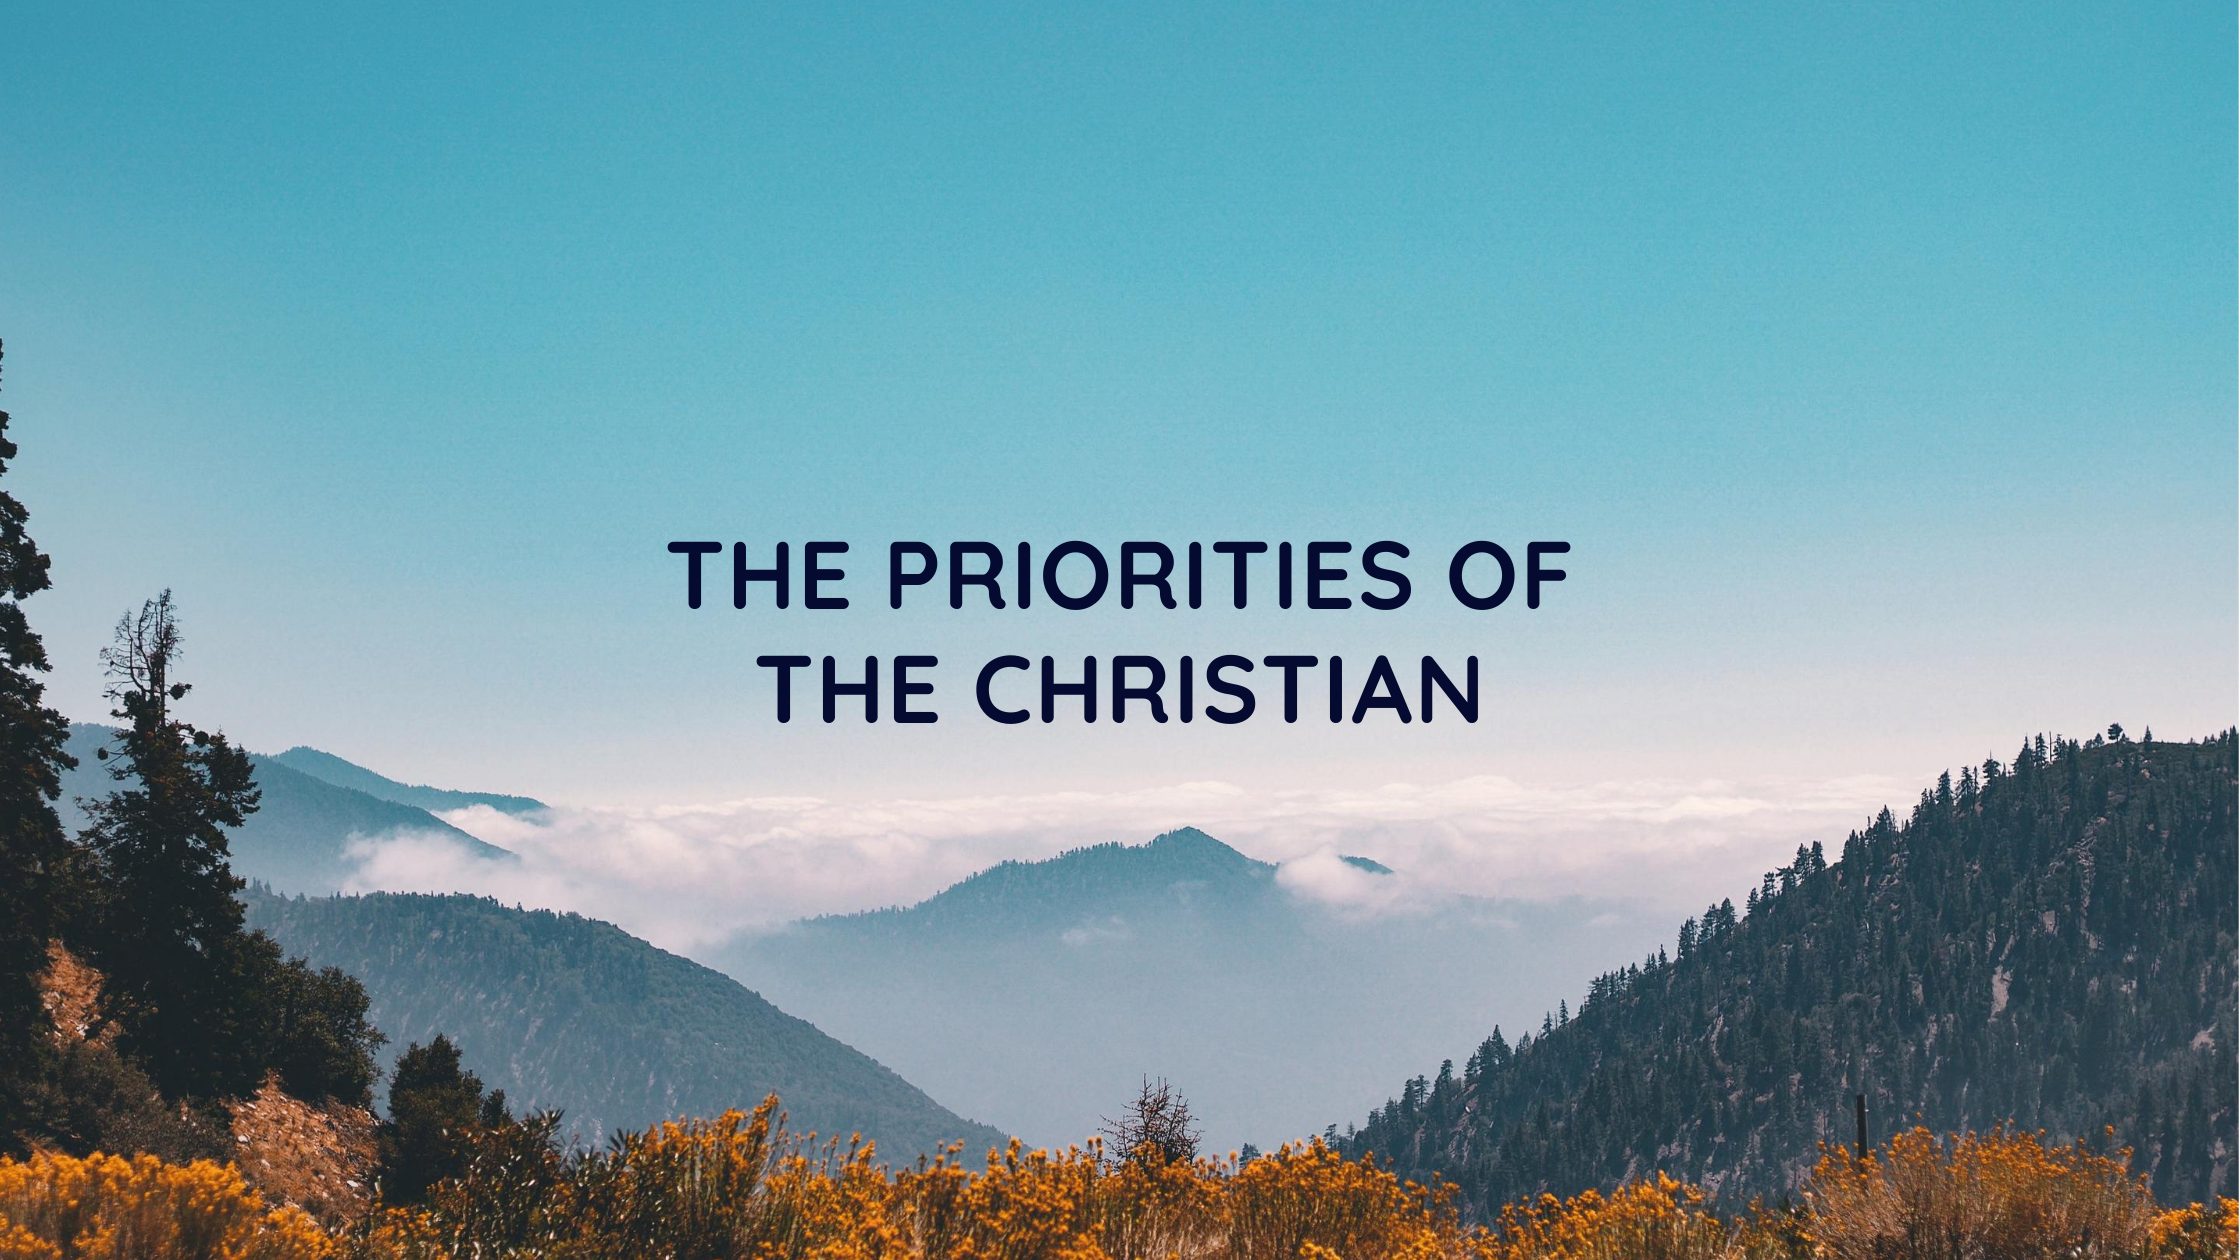 The priorities of the Christian